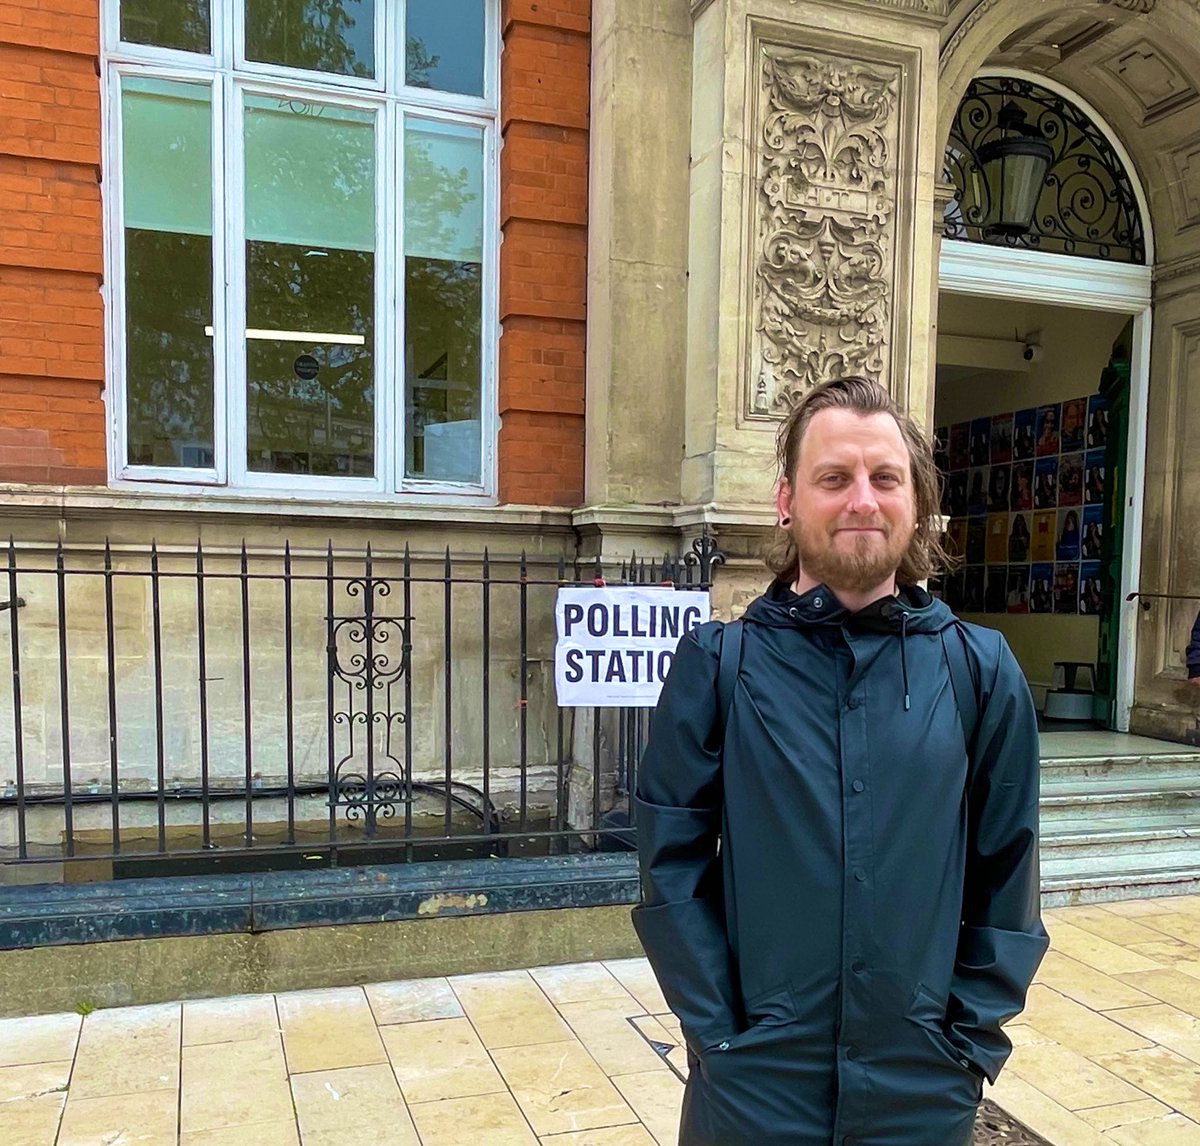 Voter Matt Tinsley in Brixton tells me just now he thinks the new voter ID rules are “just a way for the Tory government to keep people from voting”

Also says he’s received no literature from candidates during the campaign - “I had to do my own research” #VoteWatch24…